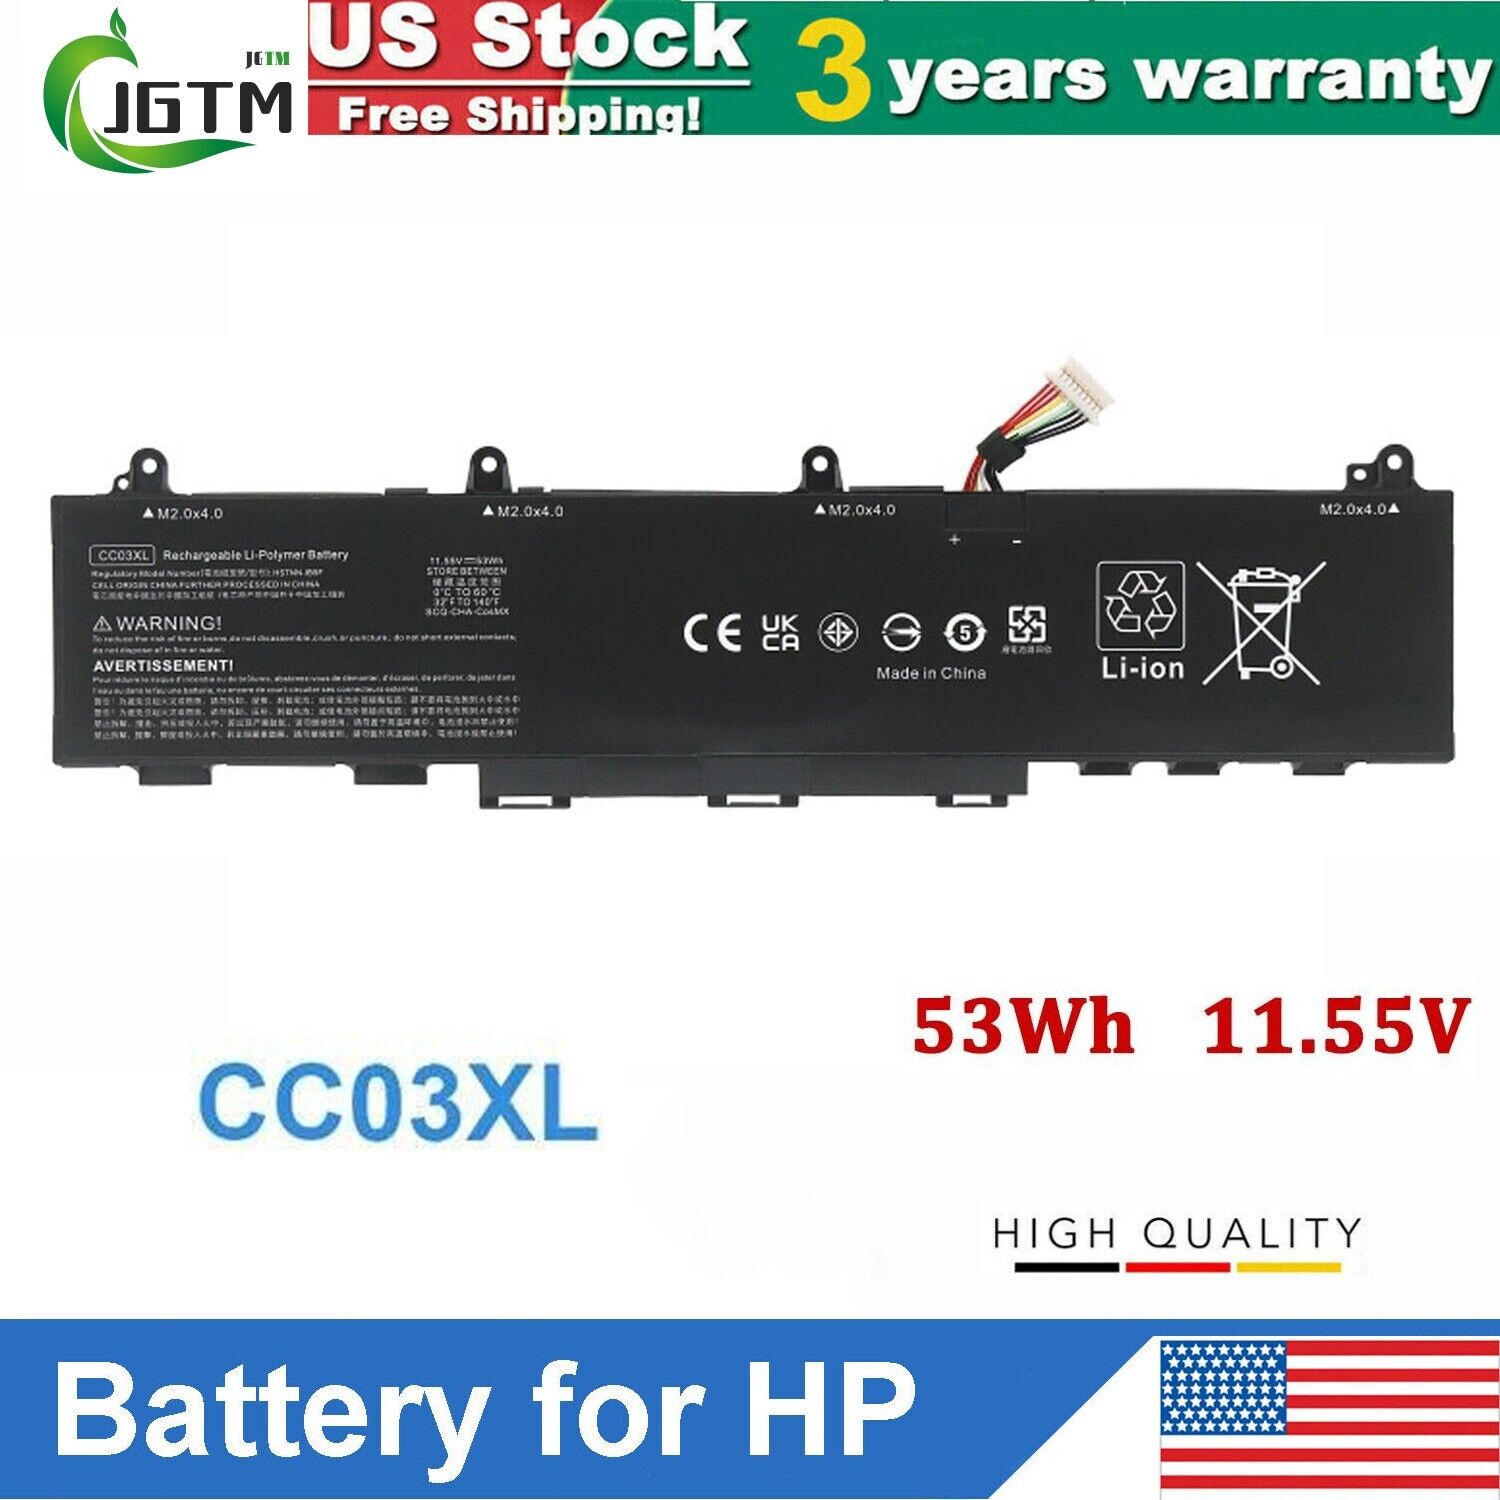 CC03XL 56Wh Battery For HP EliteBook 830 835 840 845 850 855 G7 G8 L78555-005 US